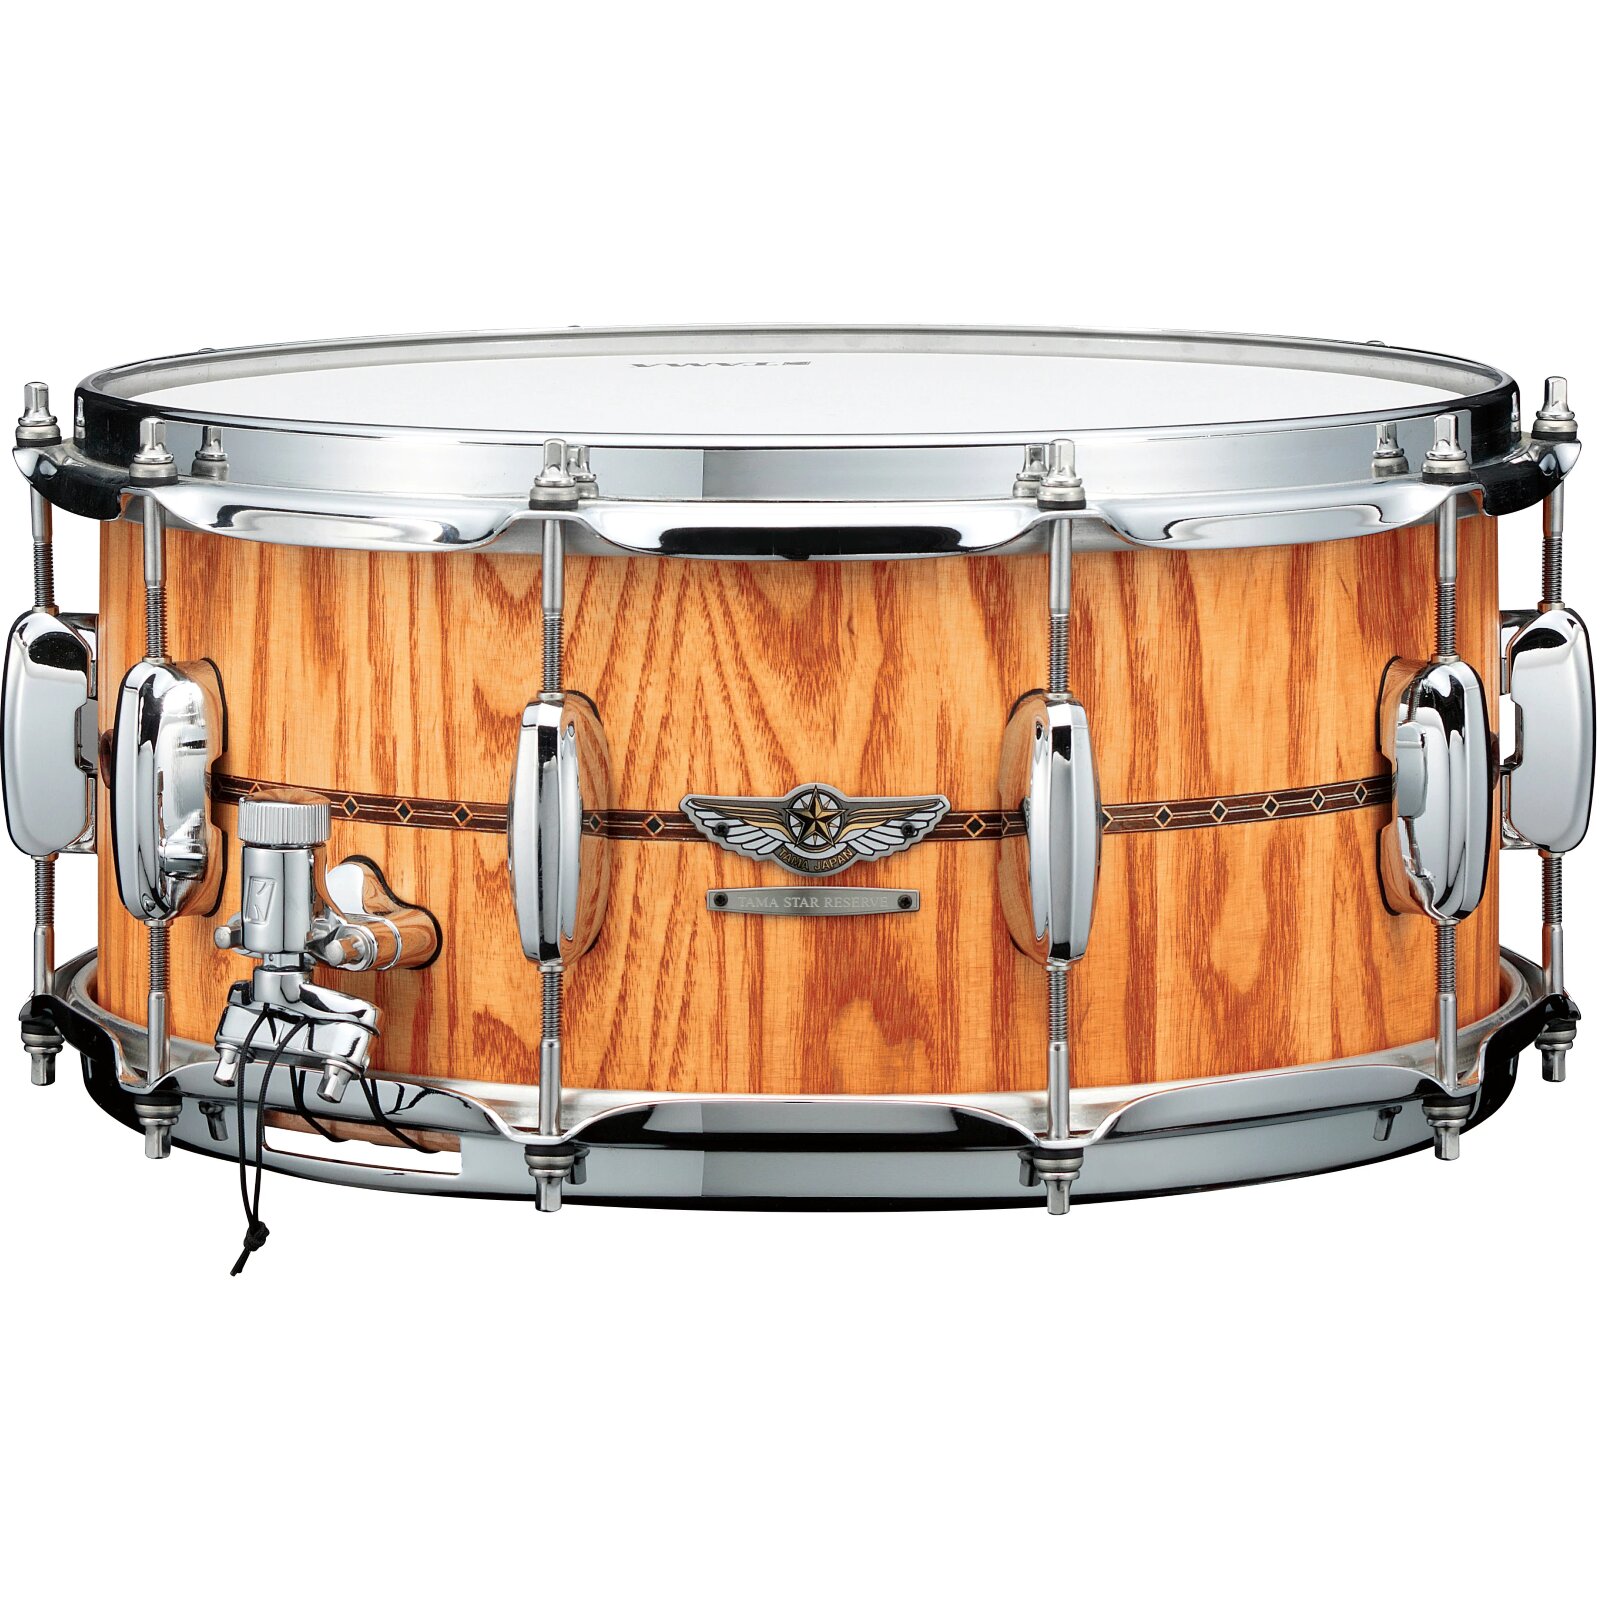 Tama TVA1465S-OAA STAR Reserve Stave Ash caisse claire 14 x 6,5 pouces (tva1465s-oaa) : photo 1